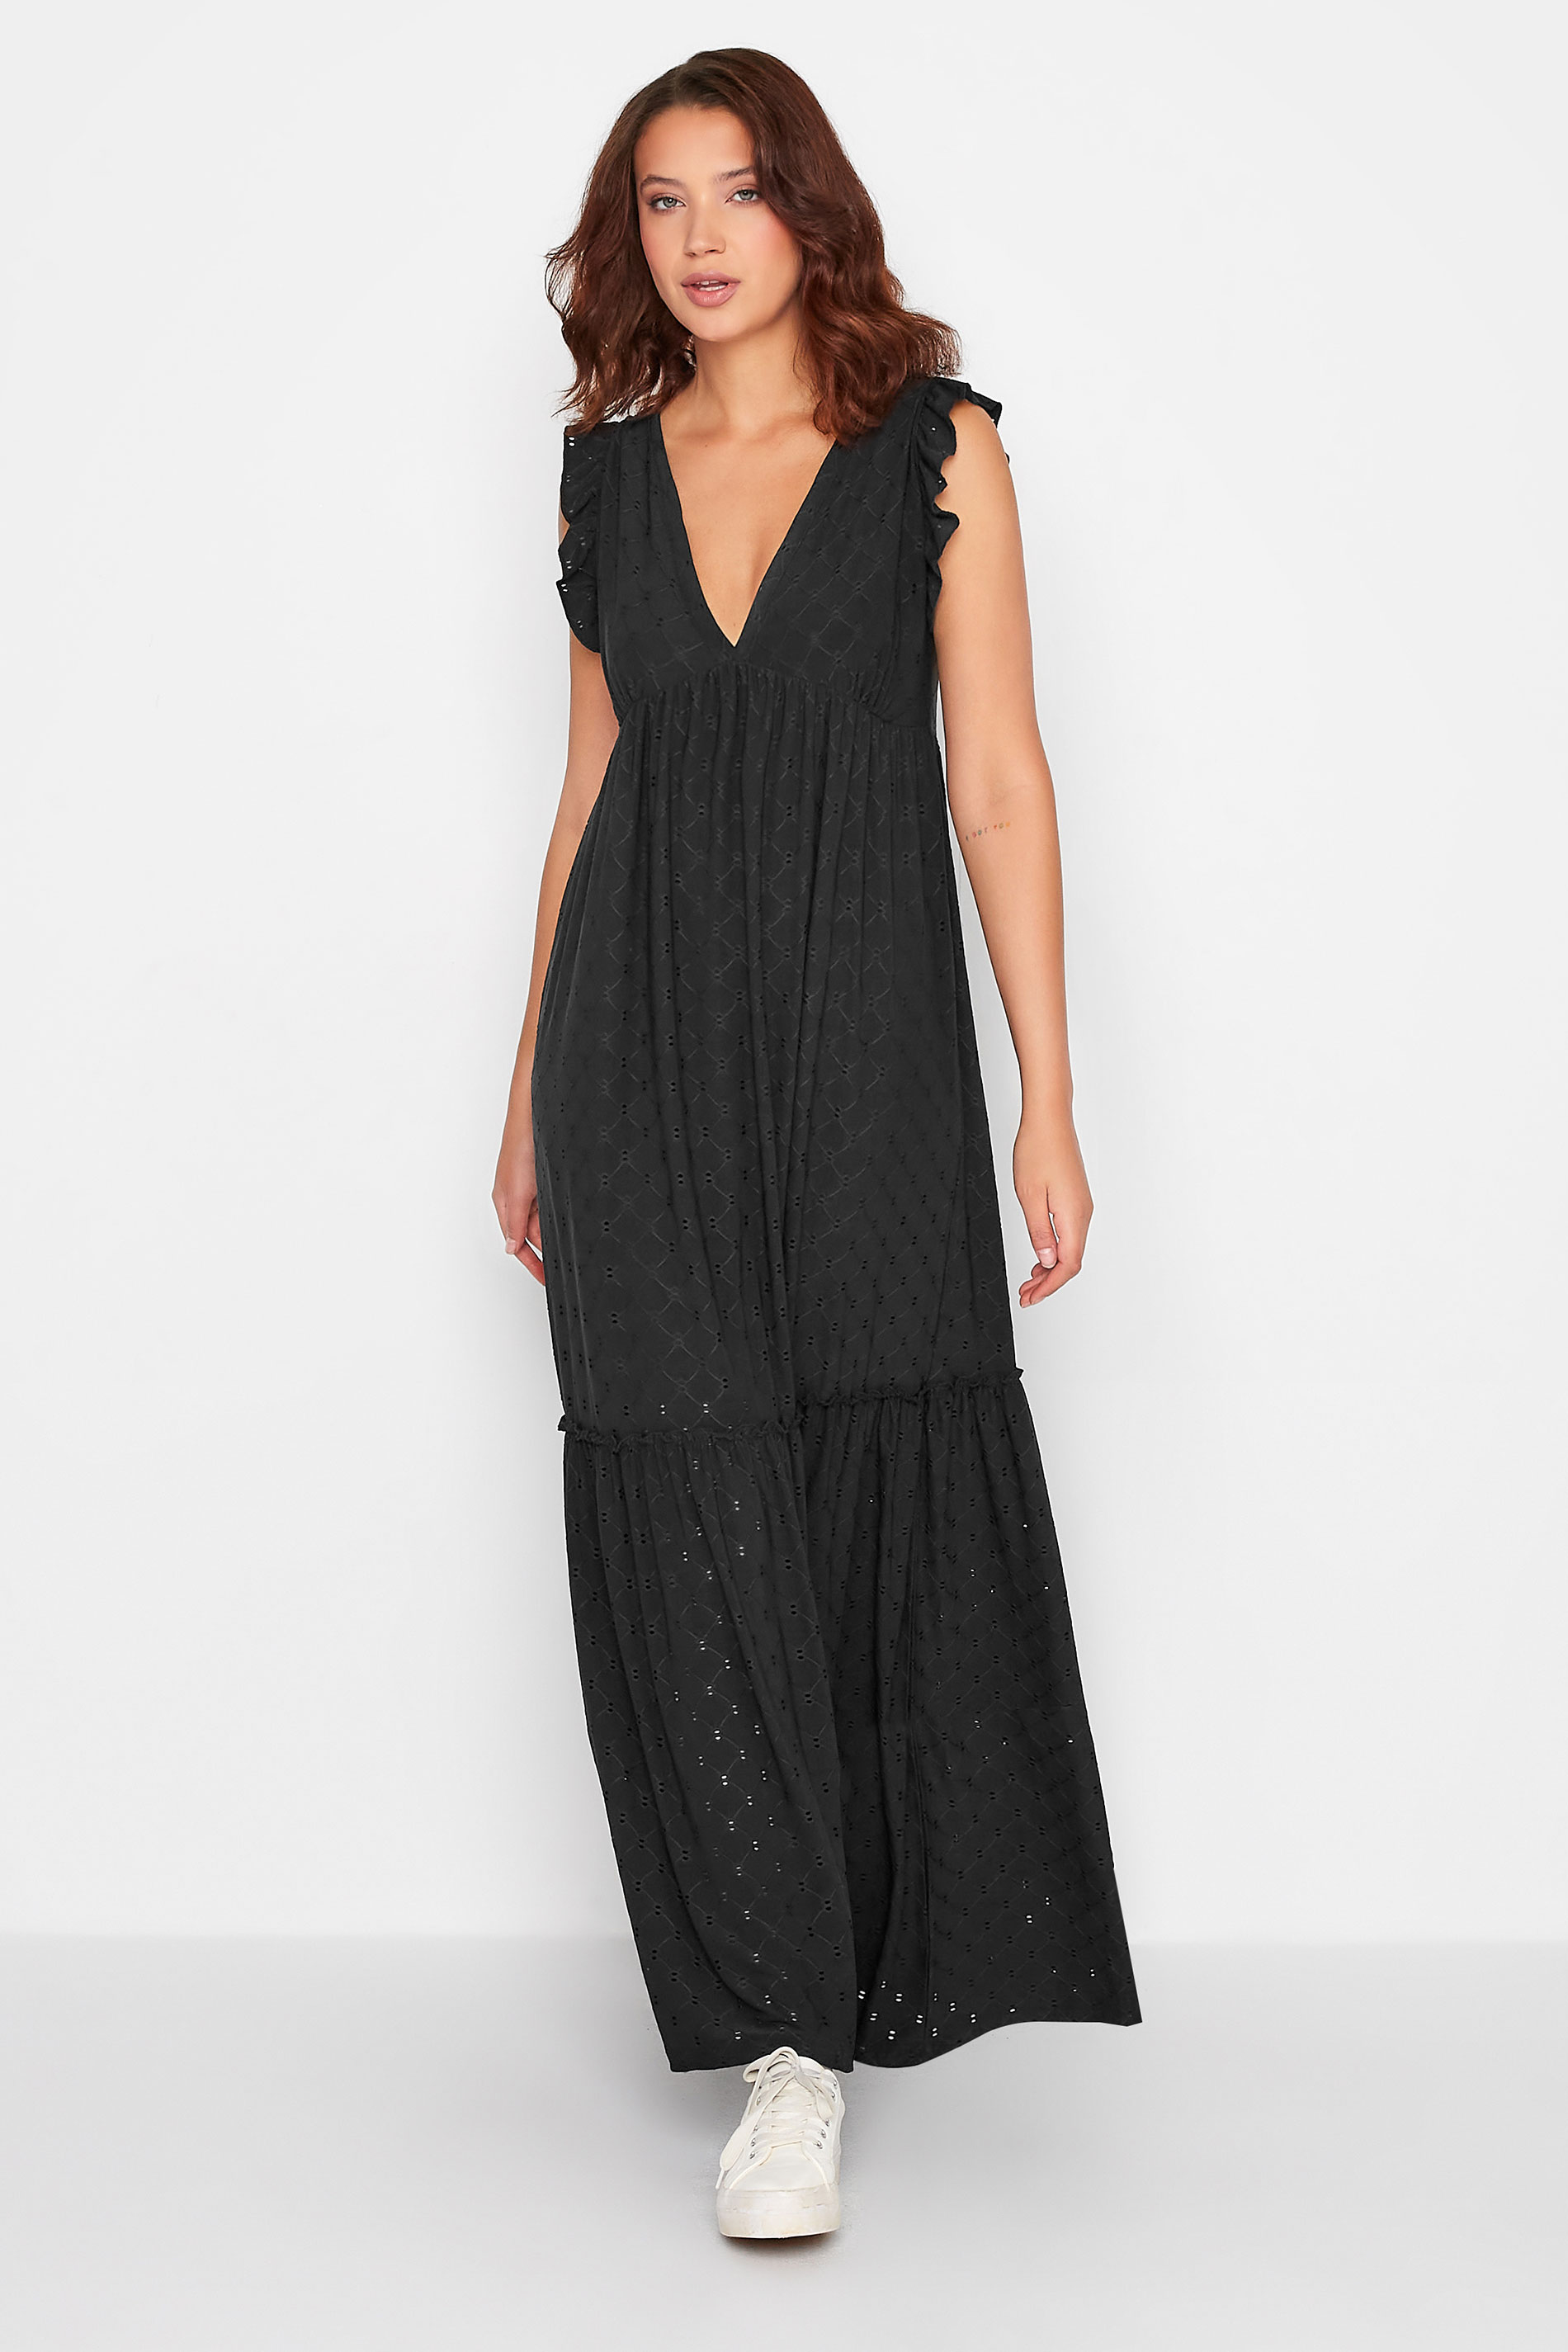 LTS Tall Black Broderie Anglaise Frill Maxi Dress 1